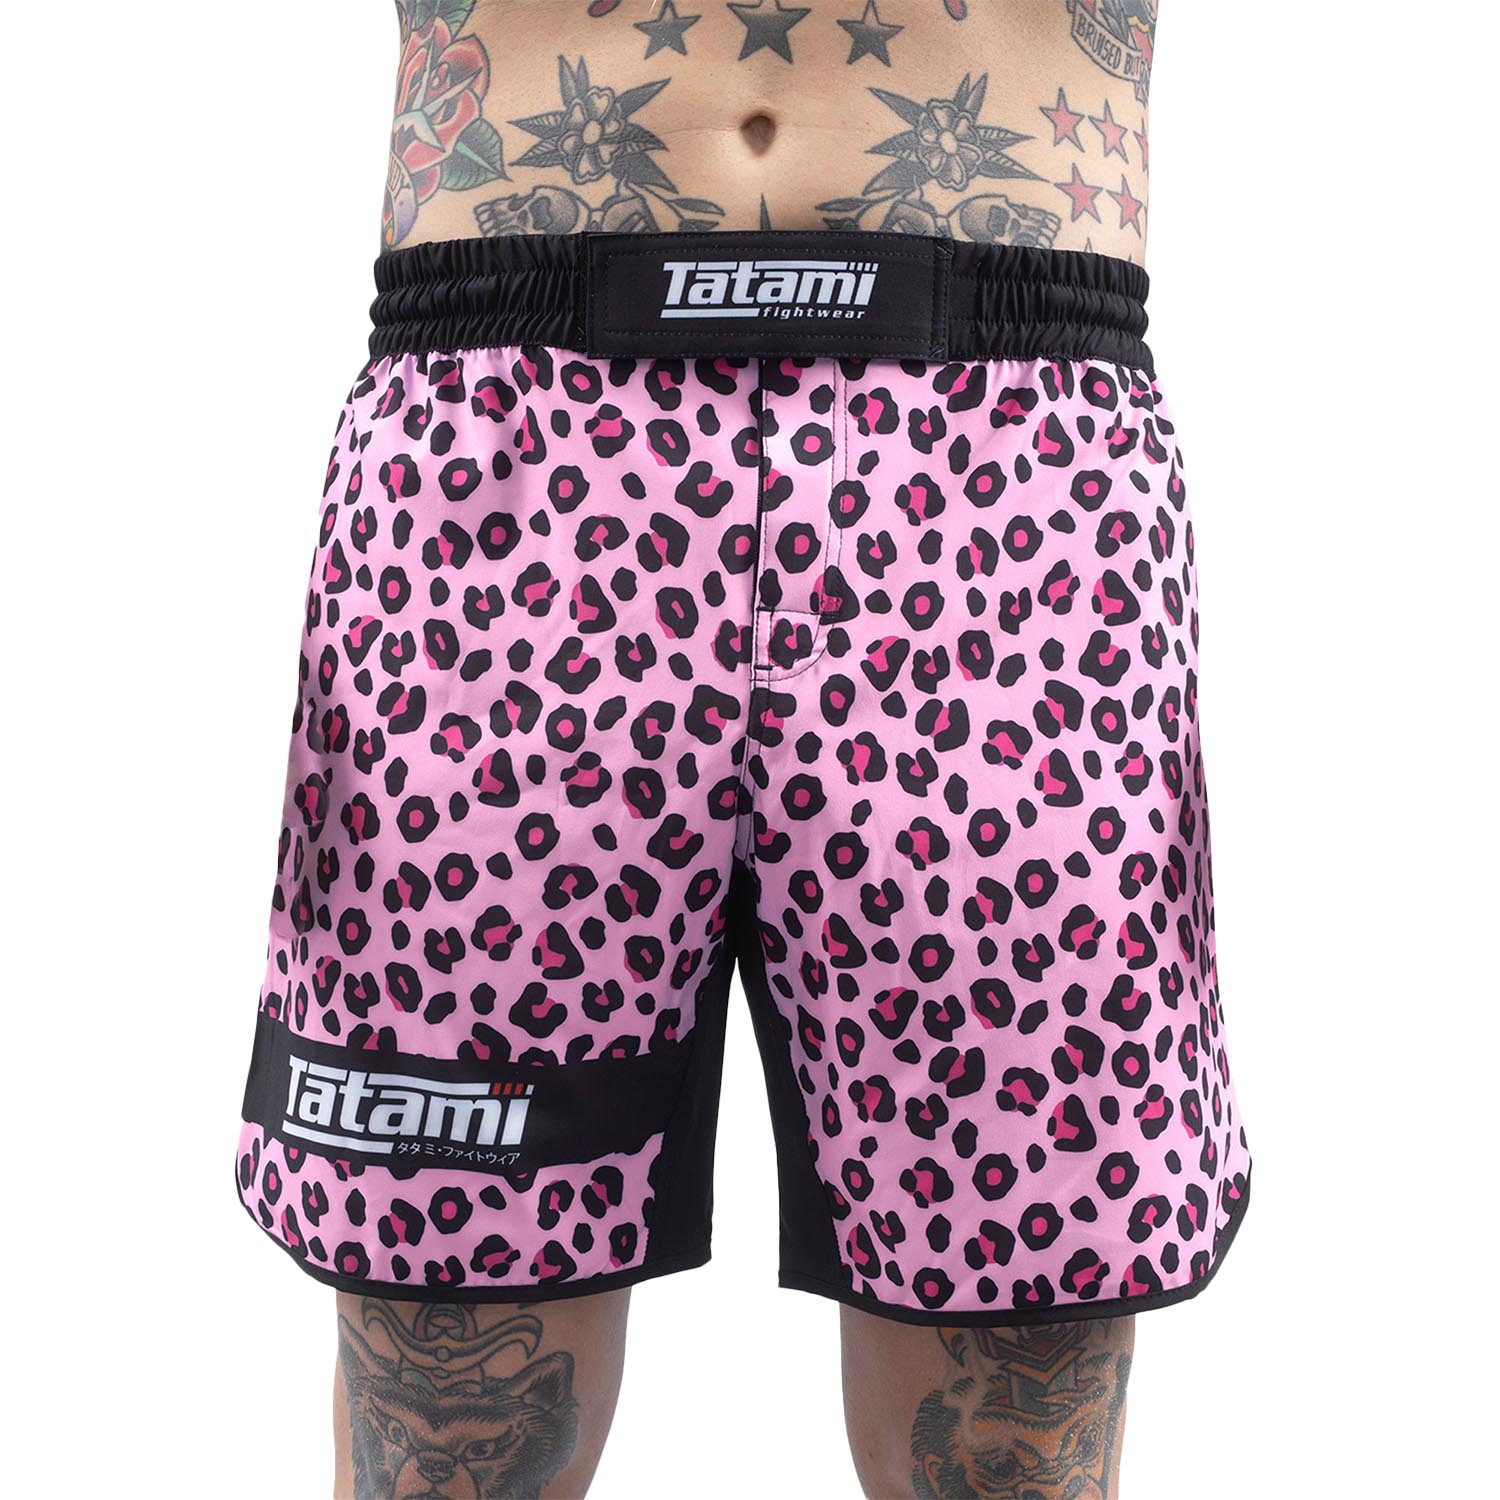 Tatami MMA Fight Shorts, Recharge, pink-leopard